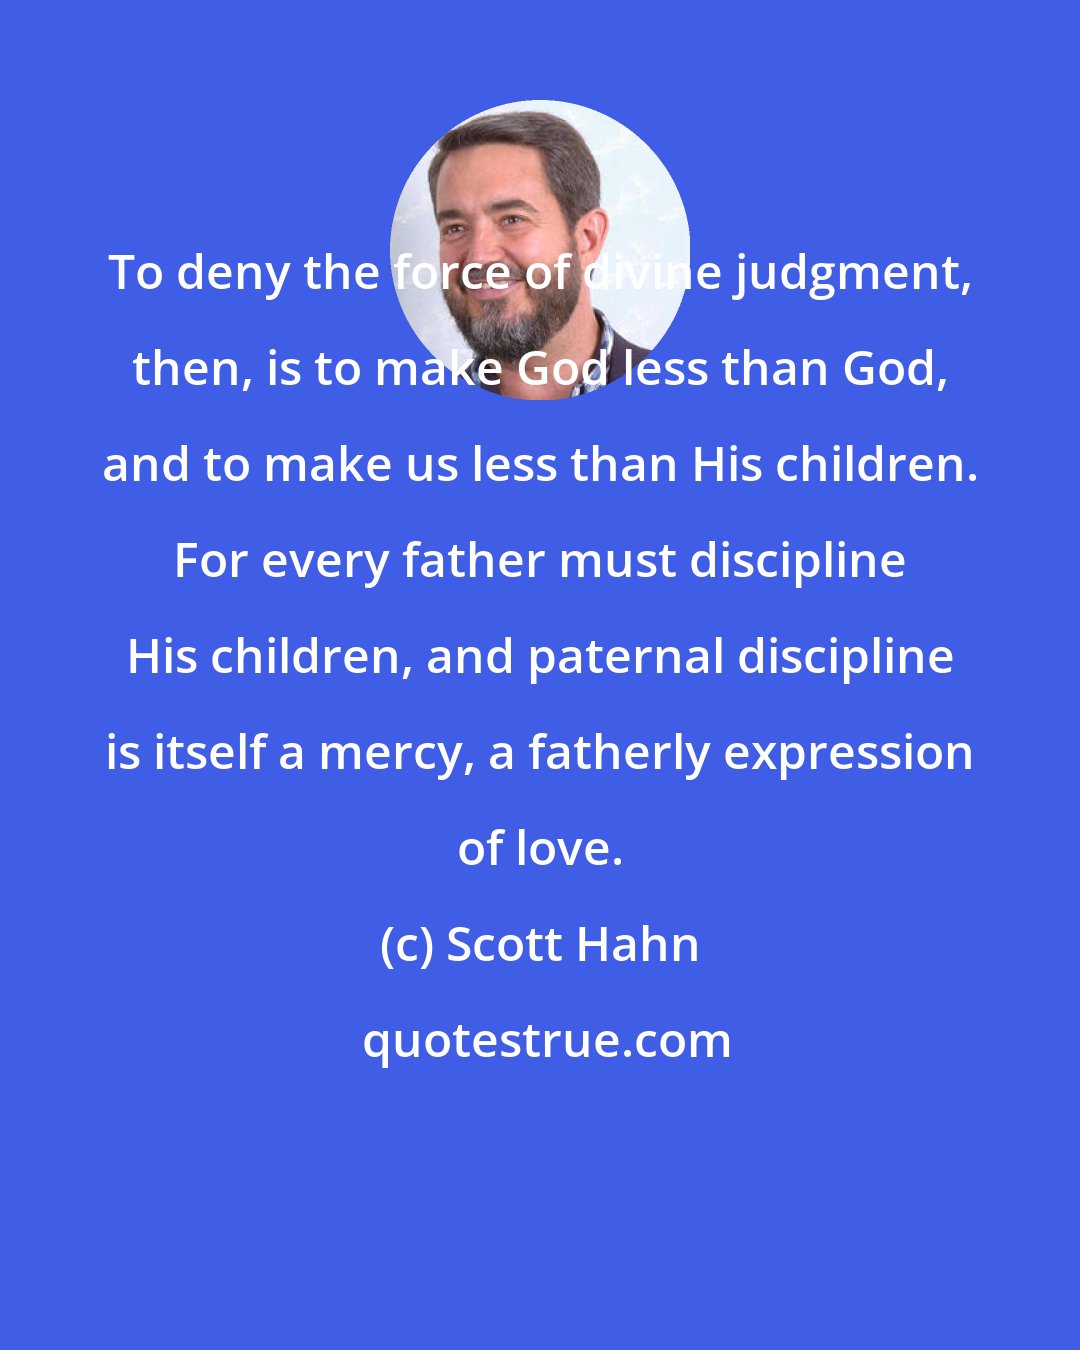 Scott Hahn: To deny the force of divine judgment, then, is to make God less than God, and to make us less than His children. For every father must discipline His children, and paternal discipline is itself a mercy, a fatherly expression of love.